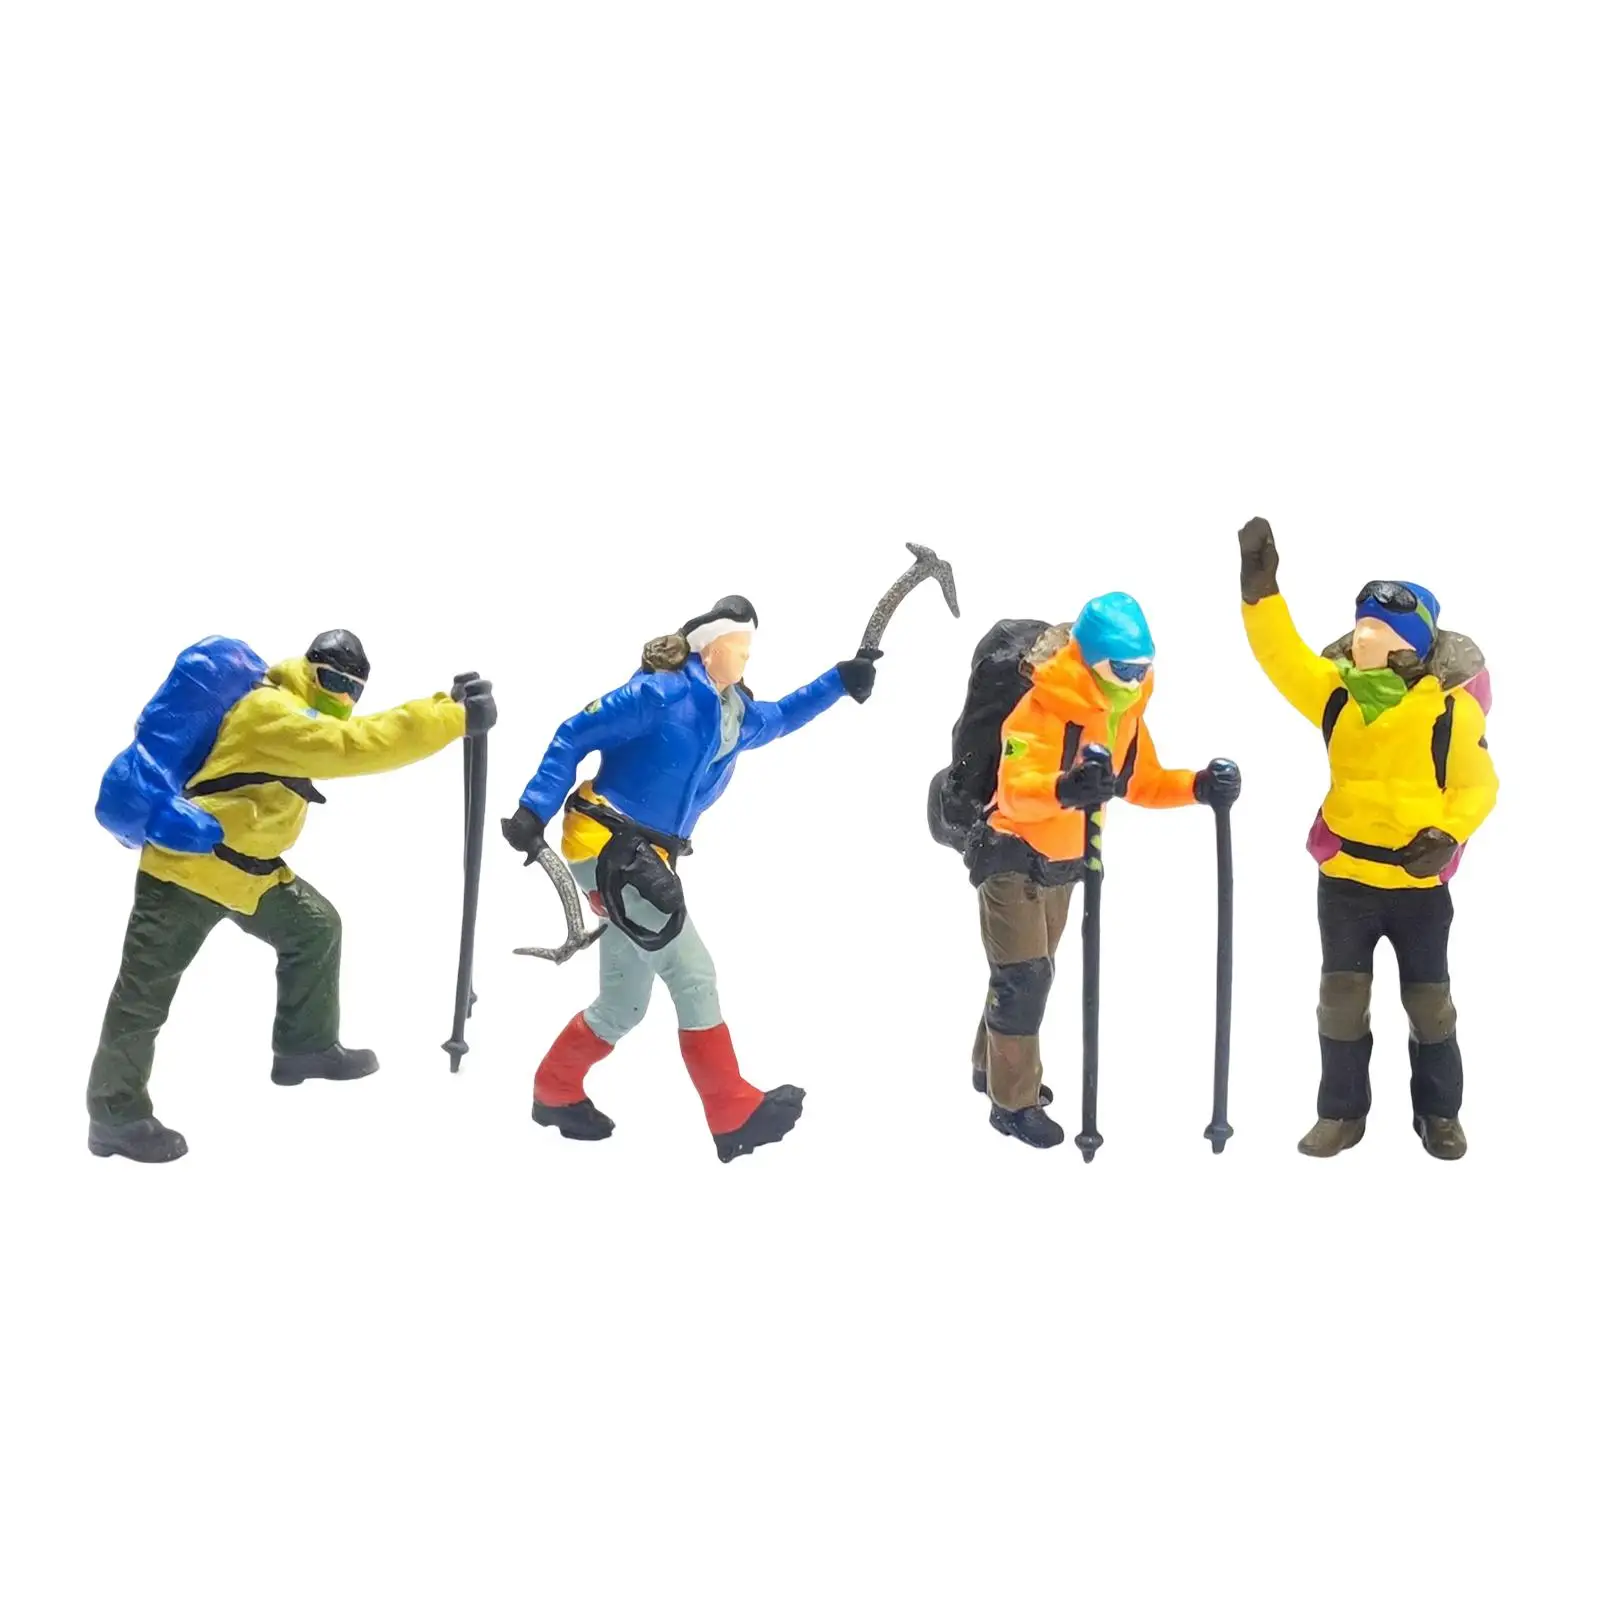 4x Resin 1/87 Scale Miniature Model Hiking Climbing Figures Character Doll Scene Railway Layout Toys Decor Supplies DIY Projects